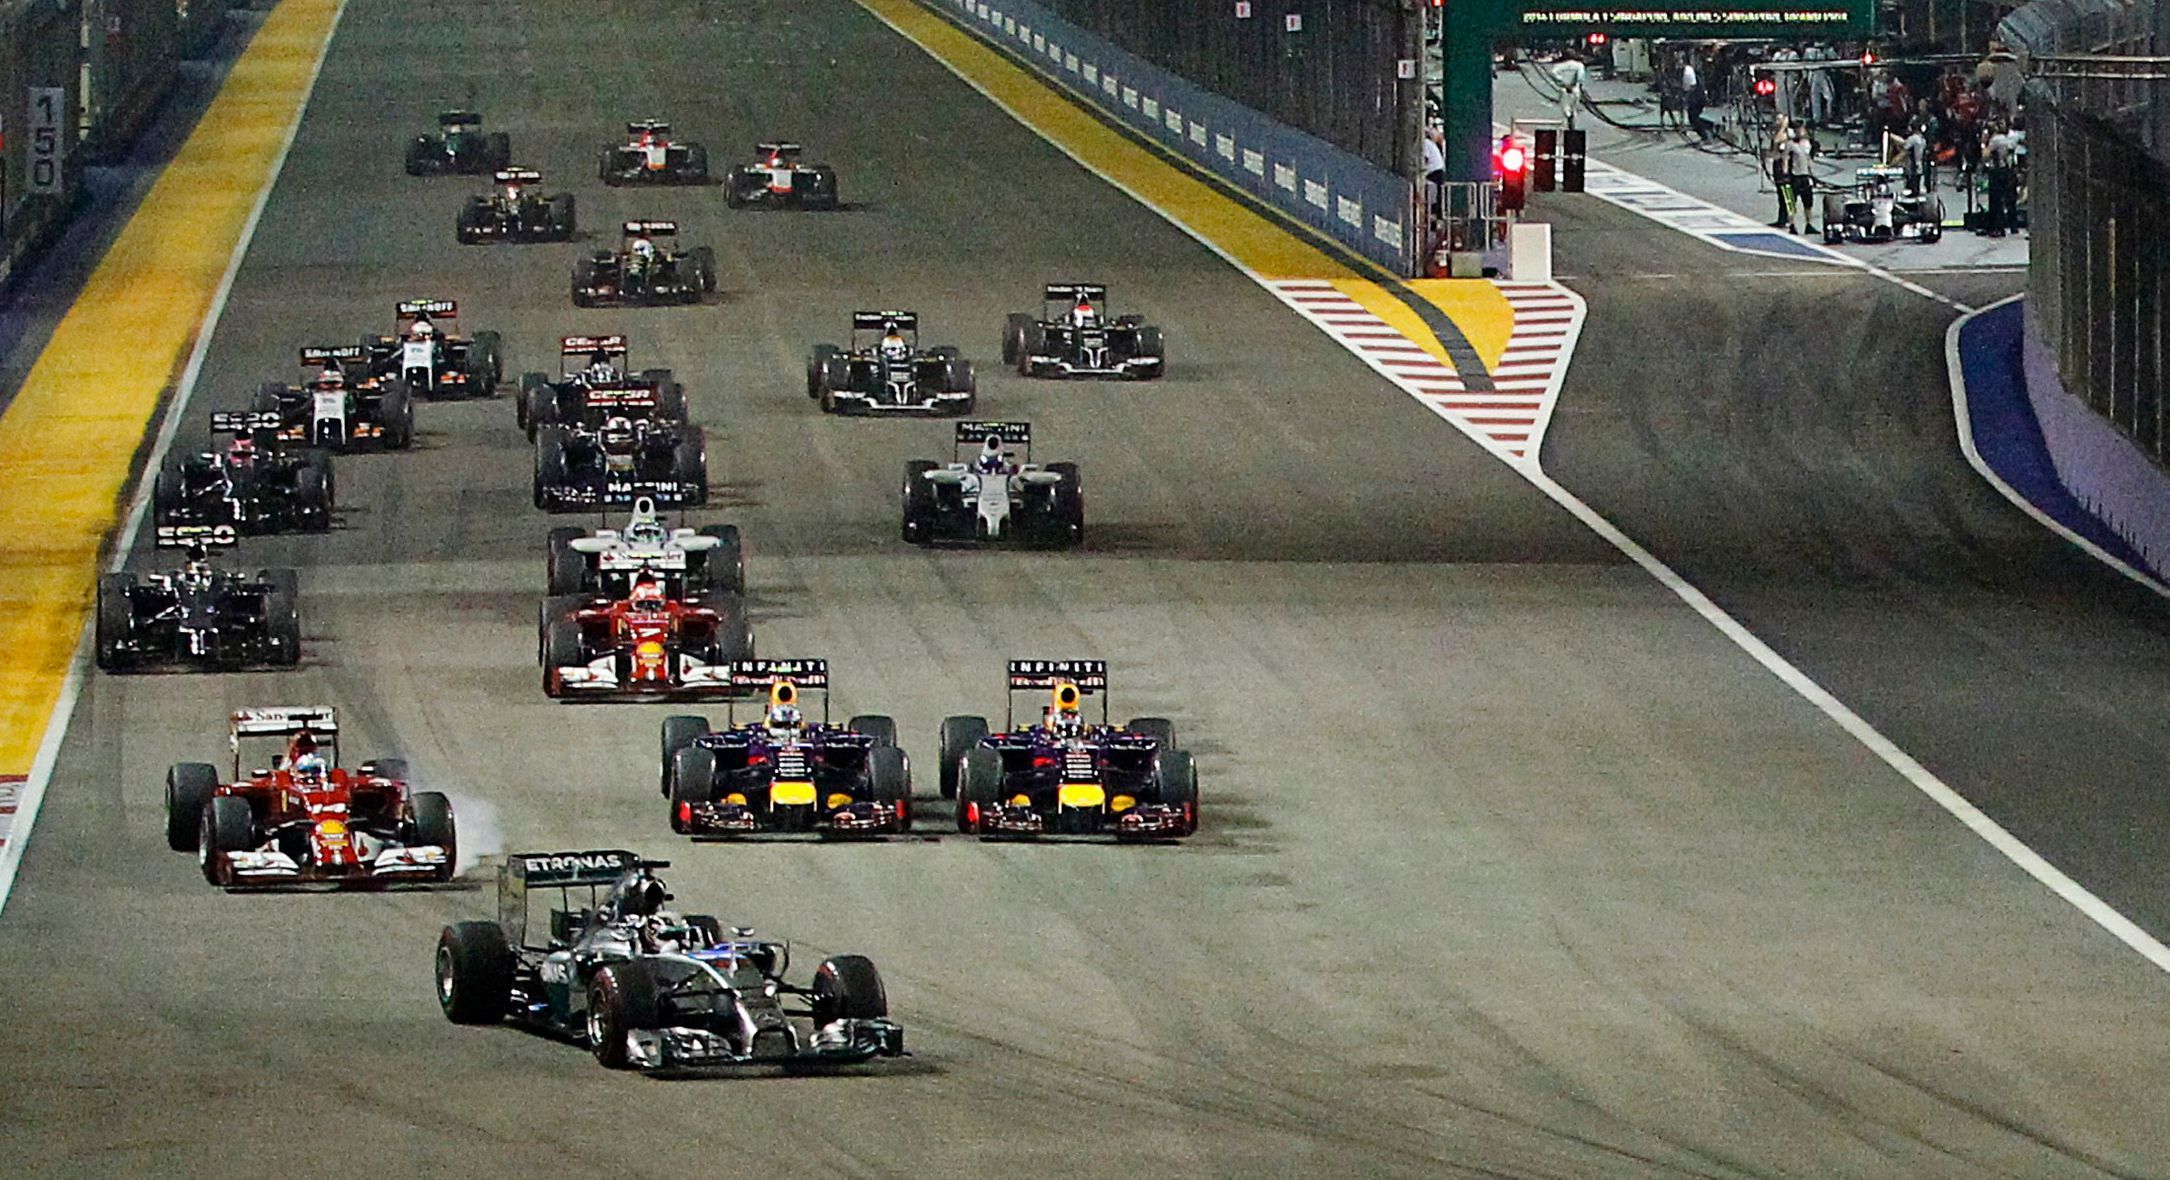 Mercedes Formula One driver Hamilton of leads the pack as team mate Rosberg starts from the pit lane following problems with his car during the Singapore F1 Grand Prix at the Marina Bay street circuit